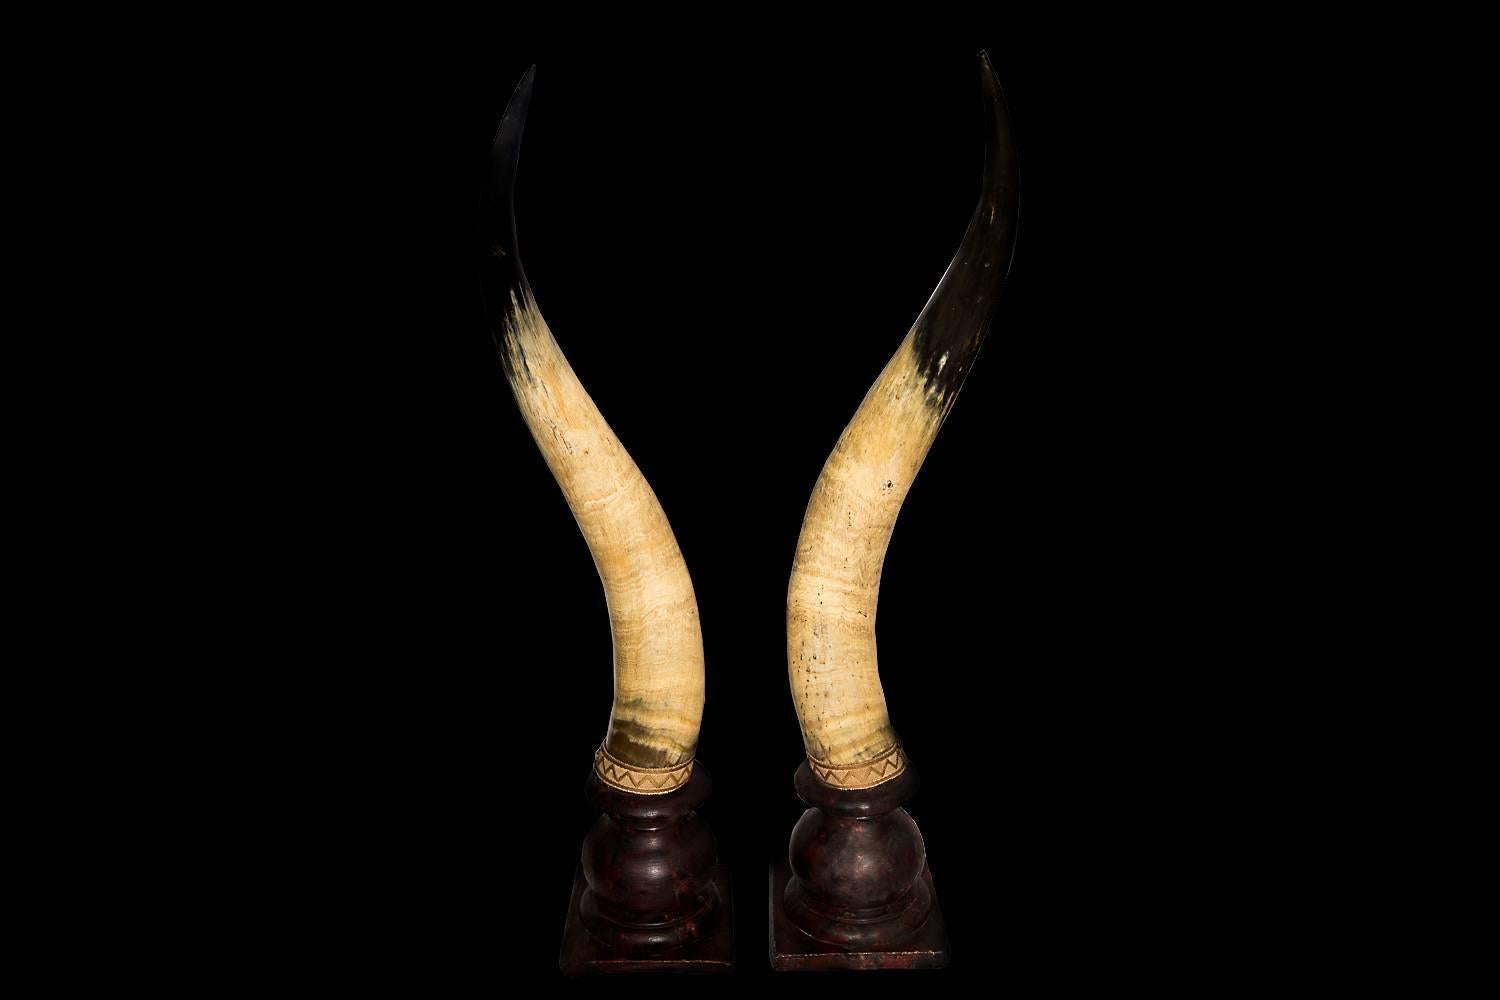 Stunning unusual grand country house finds sourced from an estate in the Scottish highlands, these horns are worldly chic personified when placed in a contemporary setting.